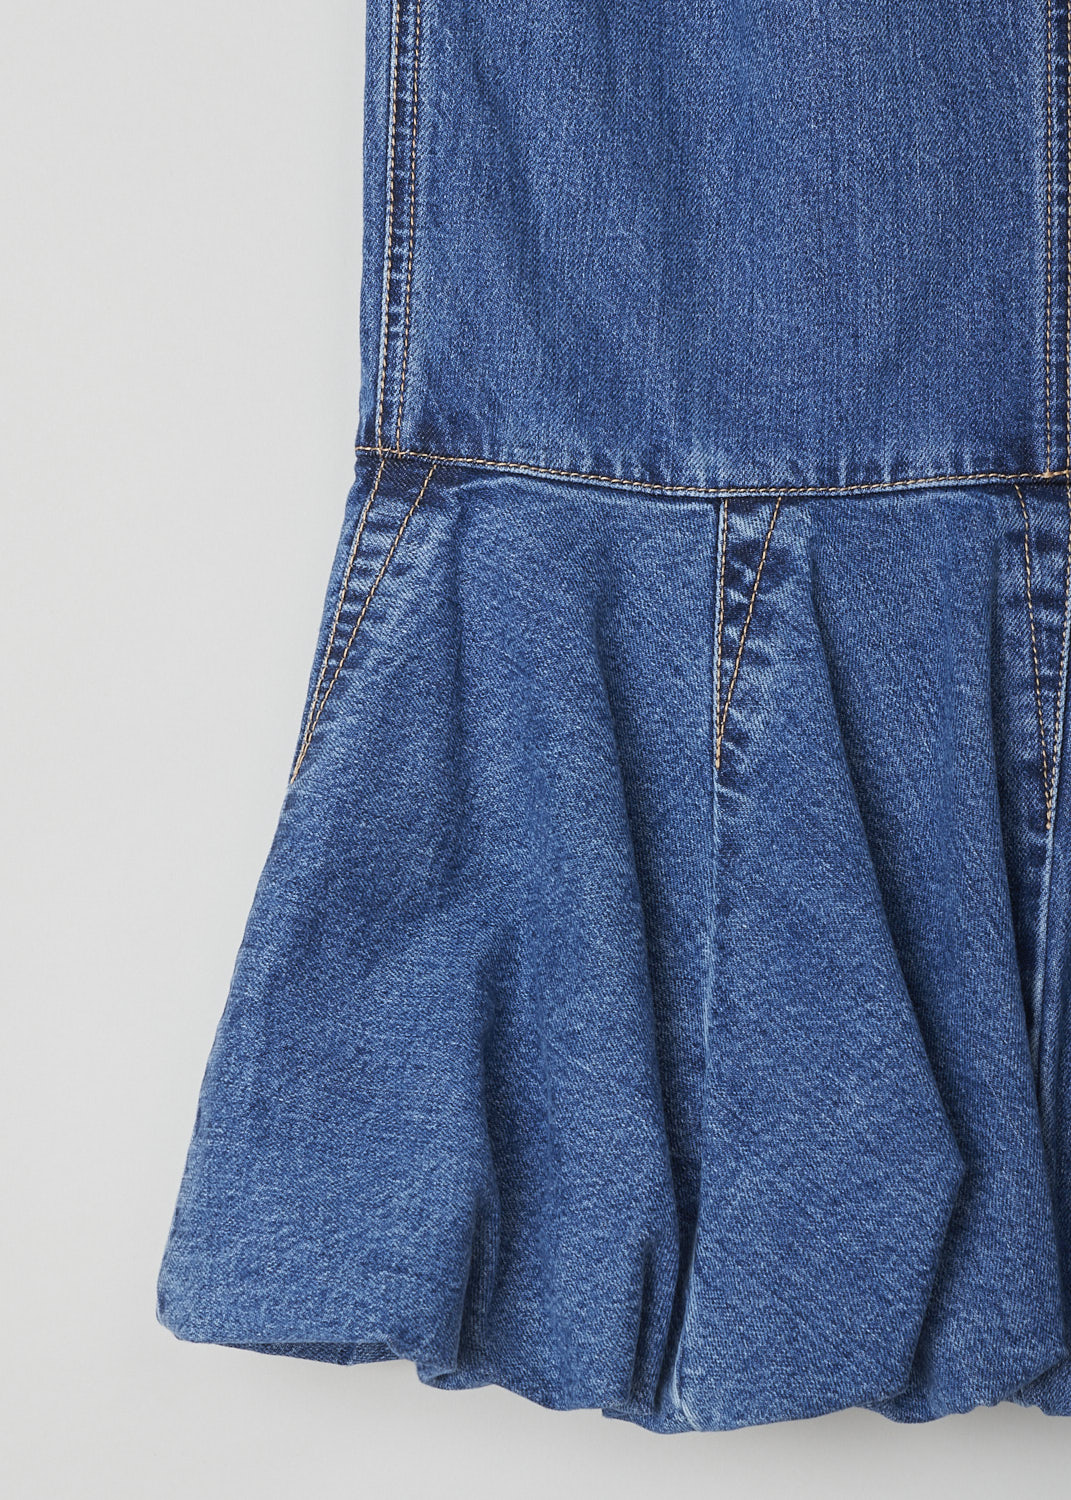 ALAÏA, BLUE DENIM FIT-AND-FLARE SKIRT, AA9J03922T441_BLEU_JEANS, Blue, Detail, This blue denim midi skirt has a fit-and-flare silhouette with a broad voluminous trim. A concealed side zip functions as the closure option. In the back, decorative seams can be found. 
